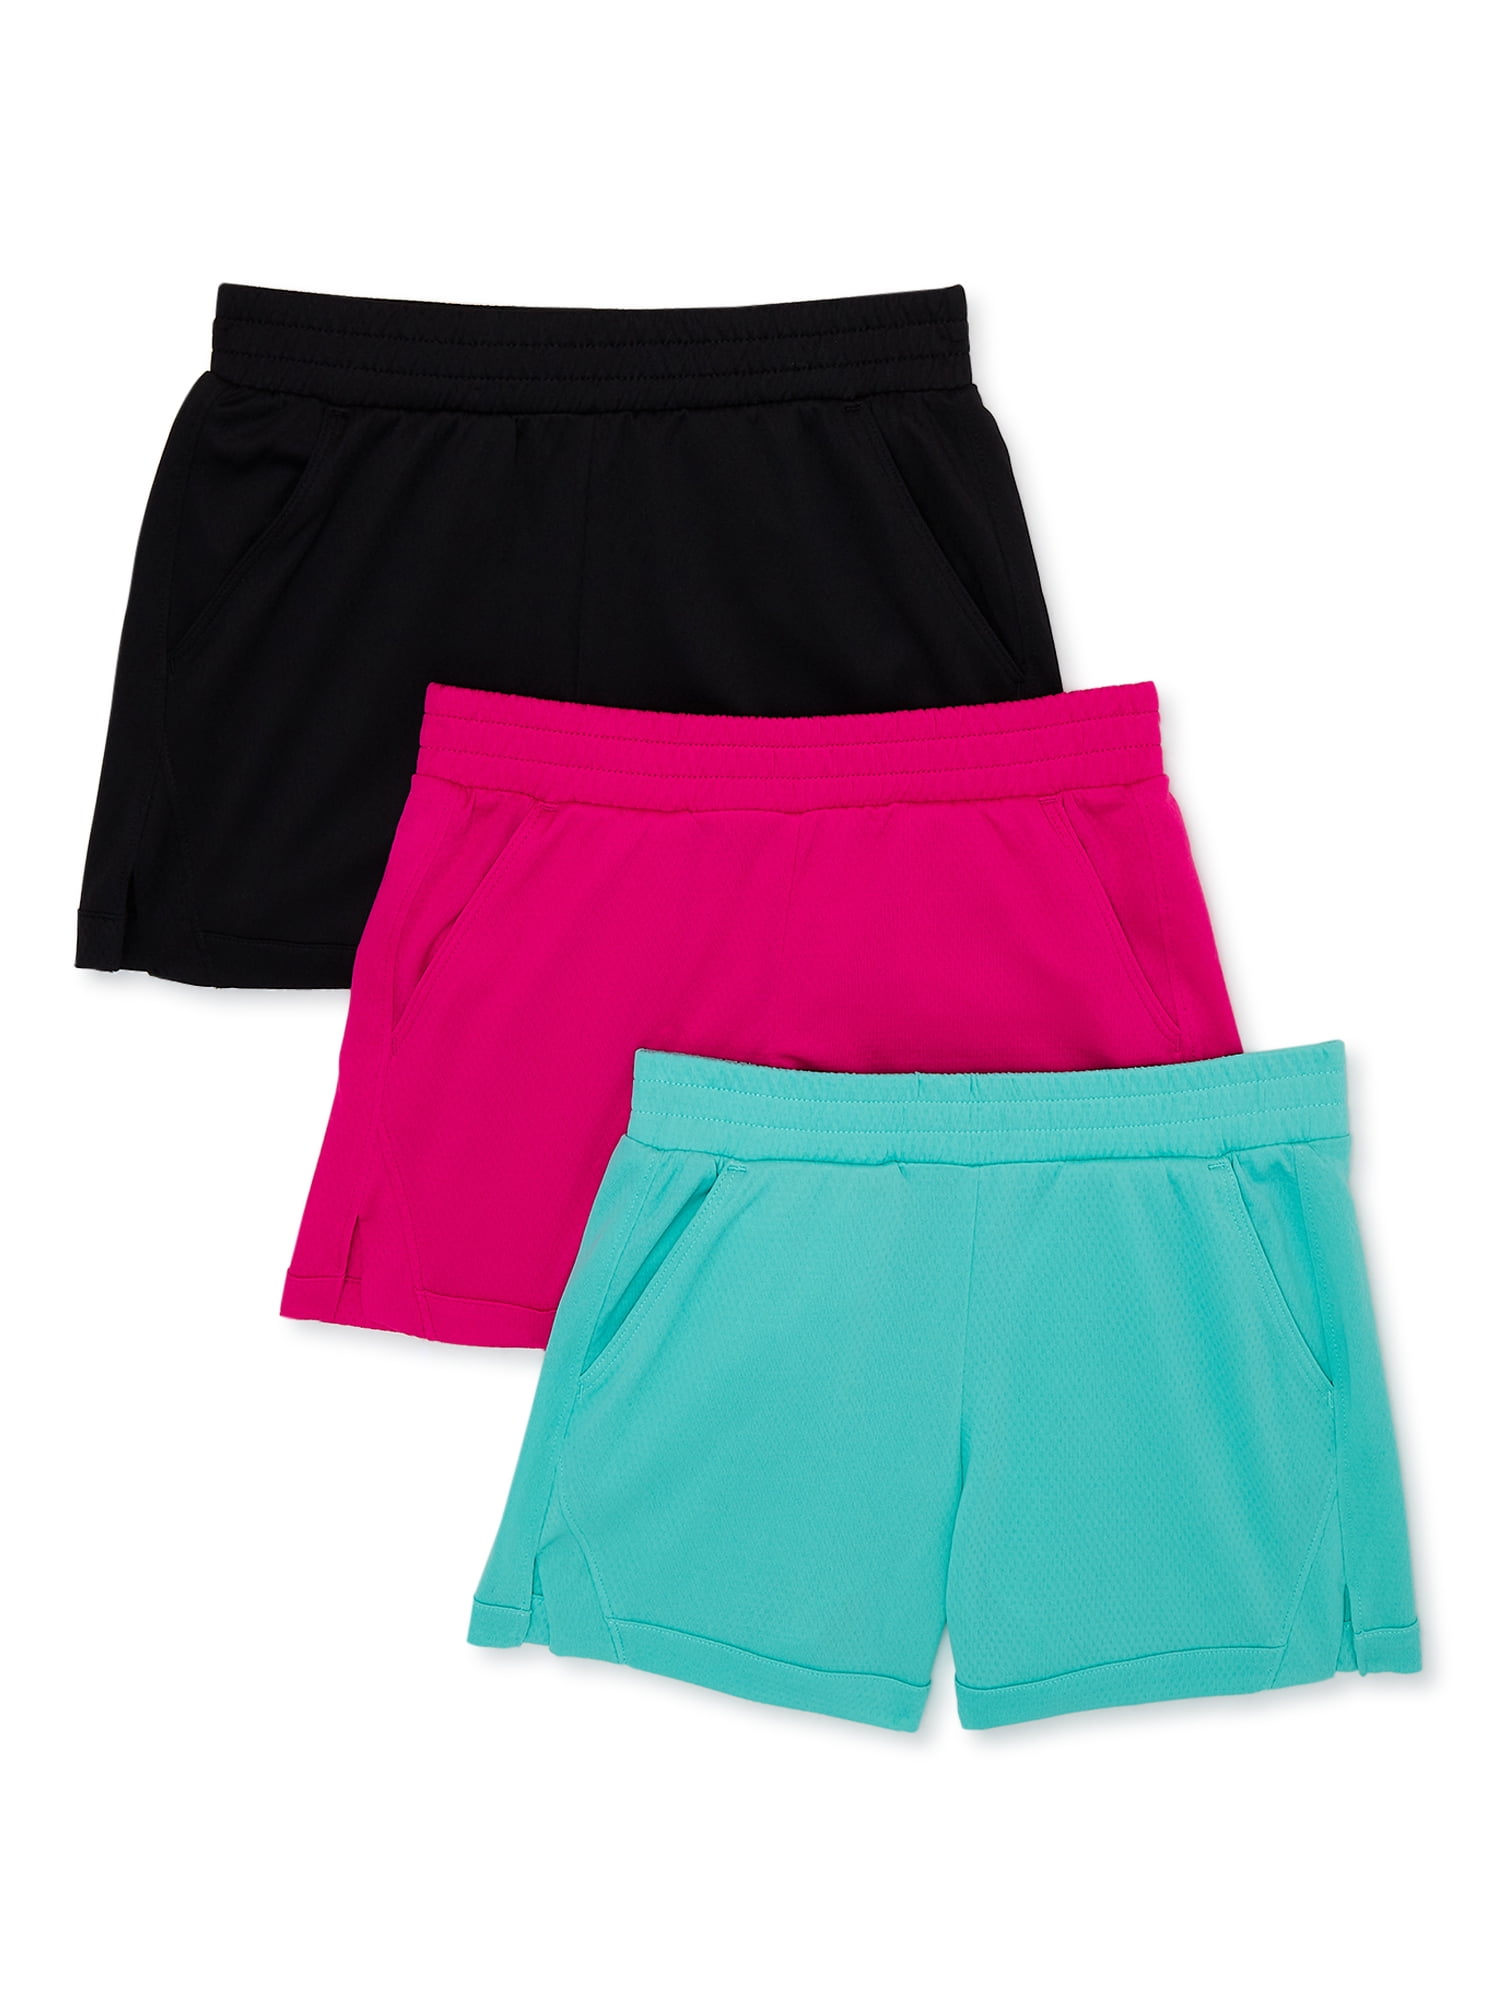 Athletic Works Girls Mesh Active Shorts, 3-Pack, Sizes 4-18 & Plus